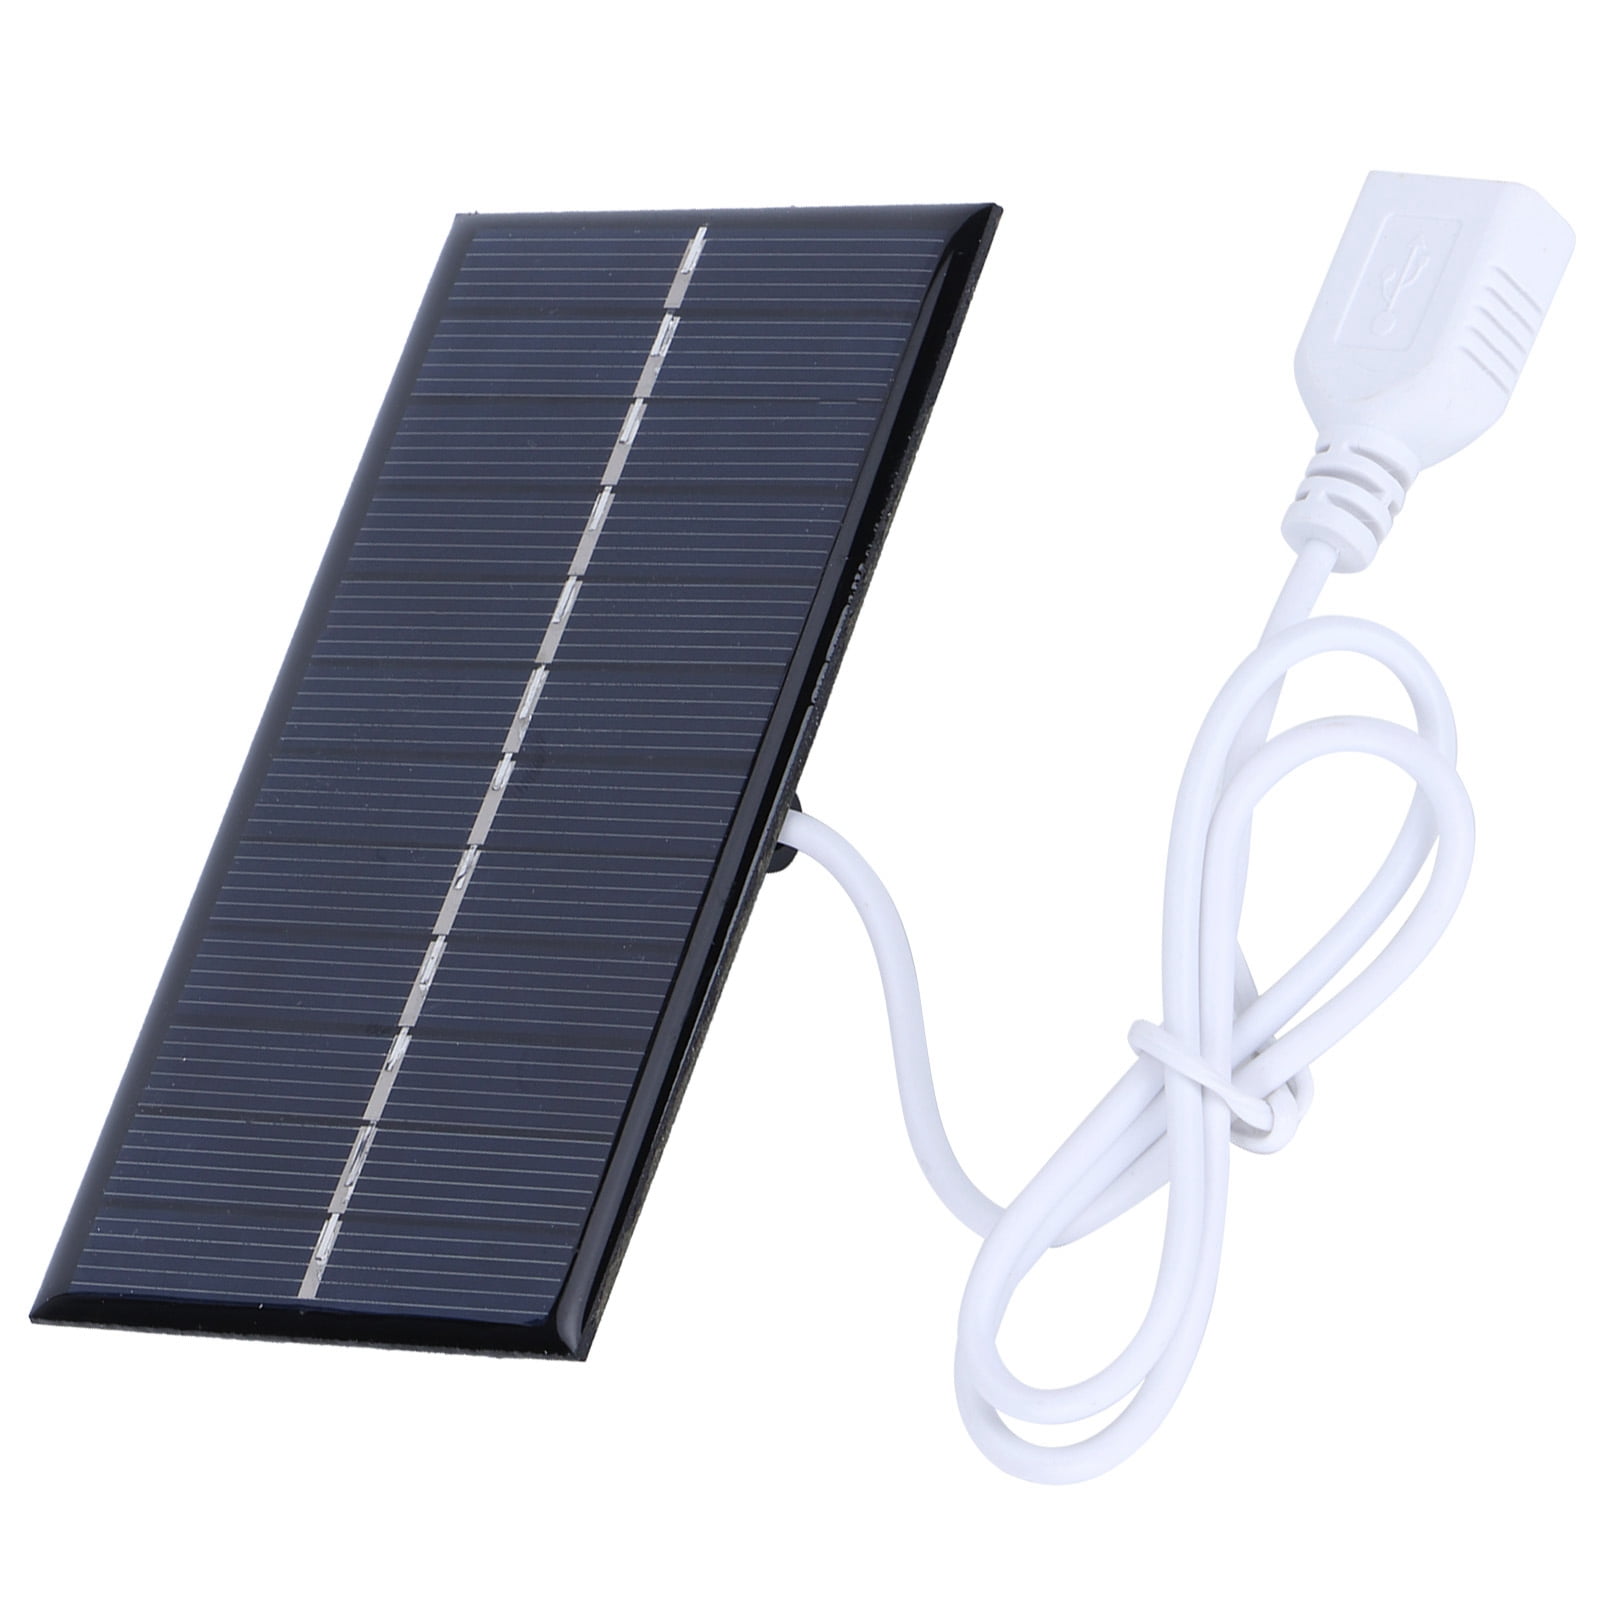 Keenso 4.2W 18V Polycrystalline Silicon Solar Panel Power Panel Solar Charging Power Board High Conversion Rate